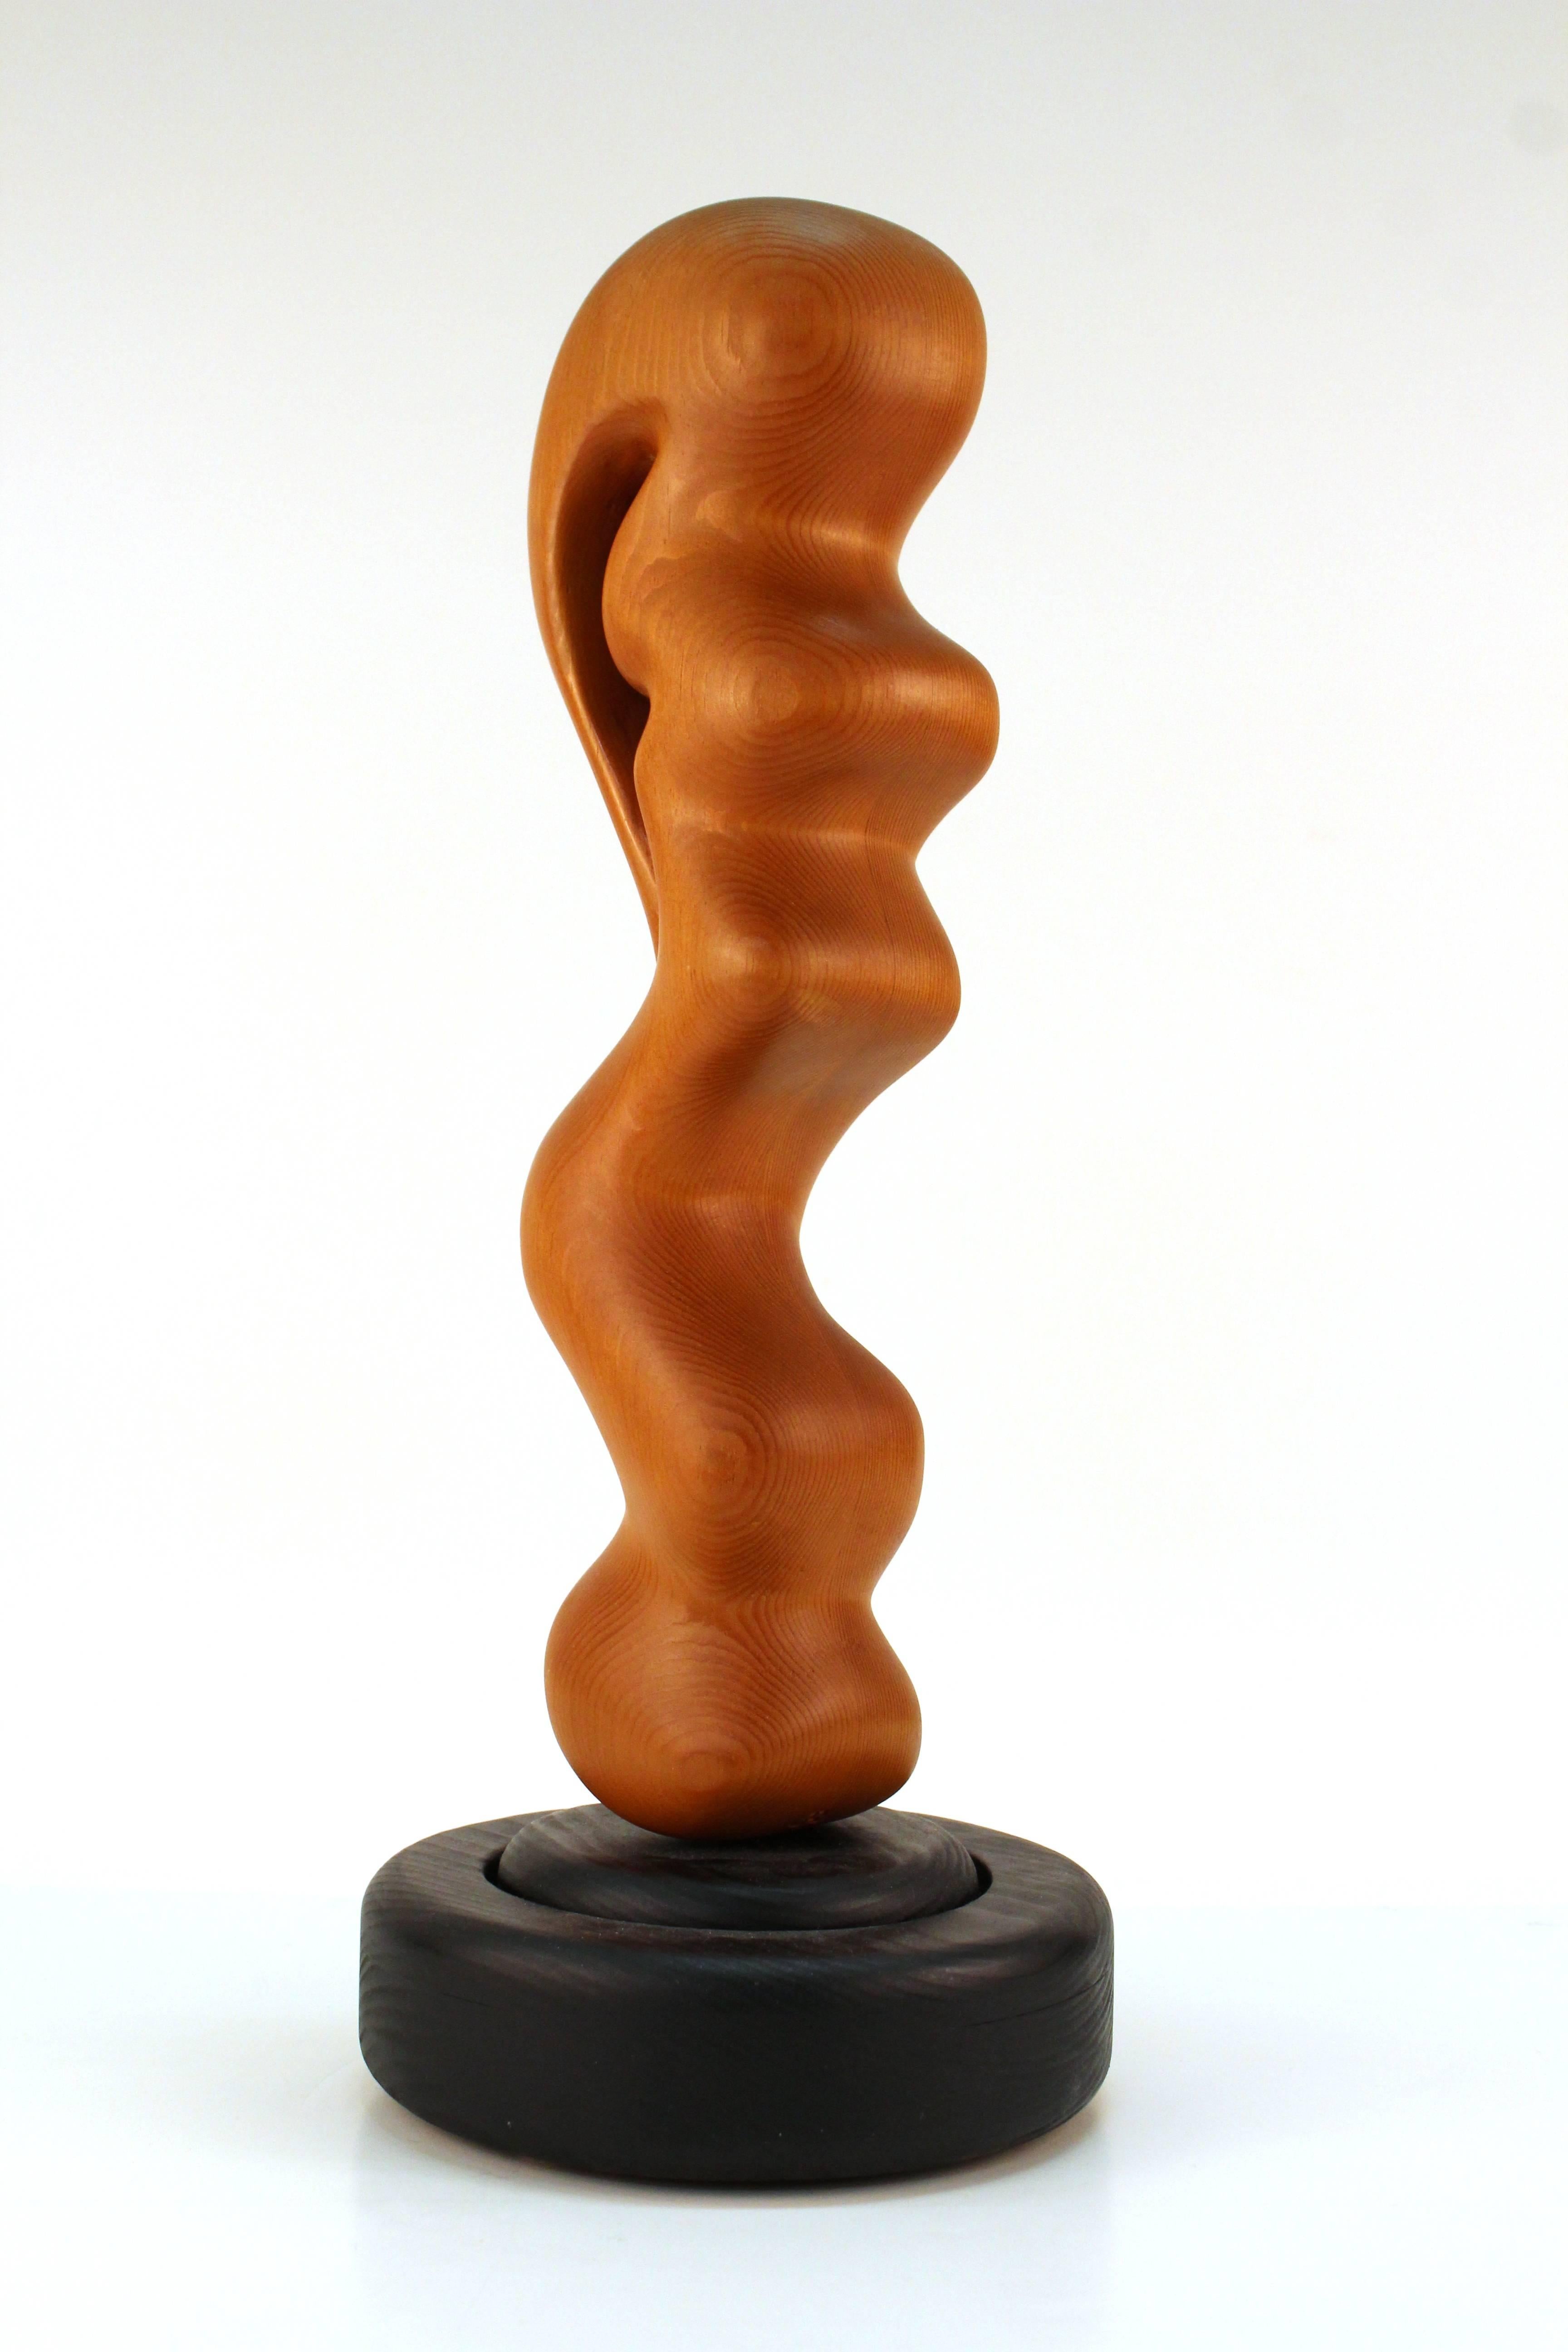 A modernist wood sculpture in sinuous curves and forms, on an ebonized circular rotating wooden base. The sculpted wood shows its natural grain. Unknown mark on the lower edge where the sculpture meets the base. In great vintage condition with some